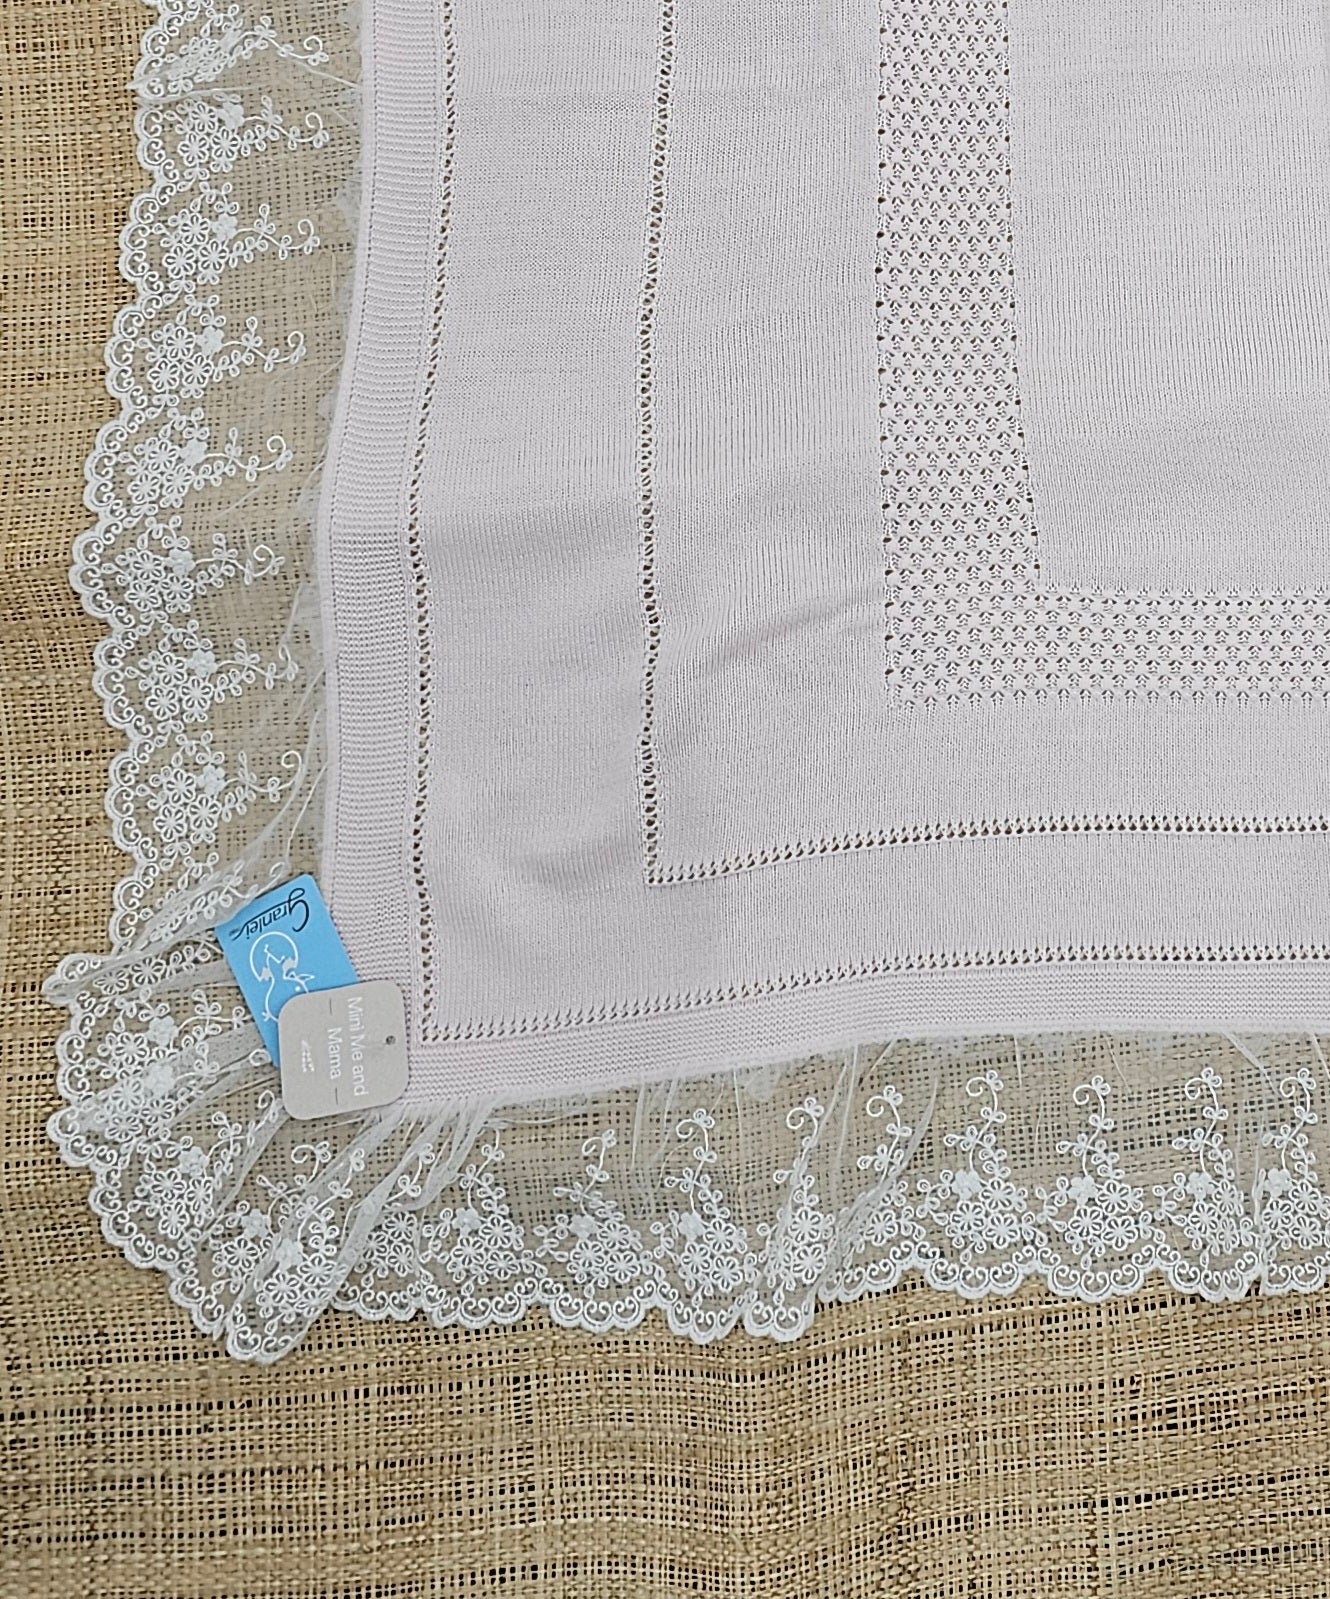 Royal European Knitted Baby Blanket with Embroidered Lace